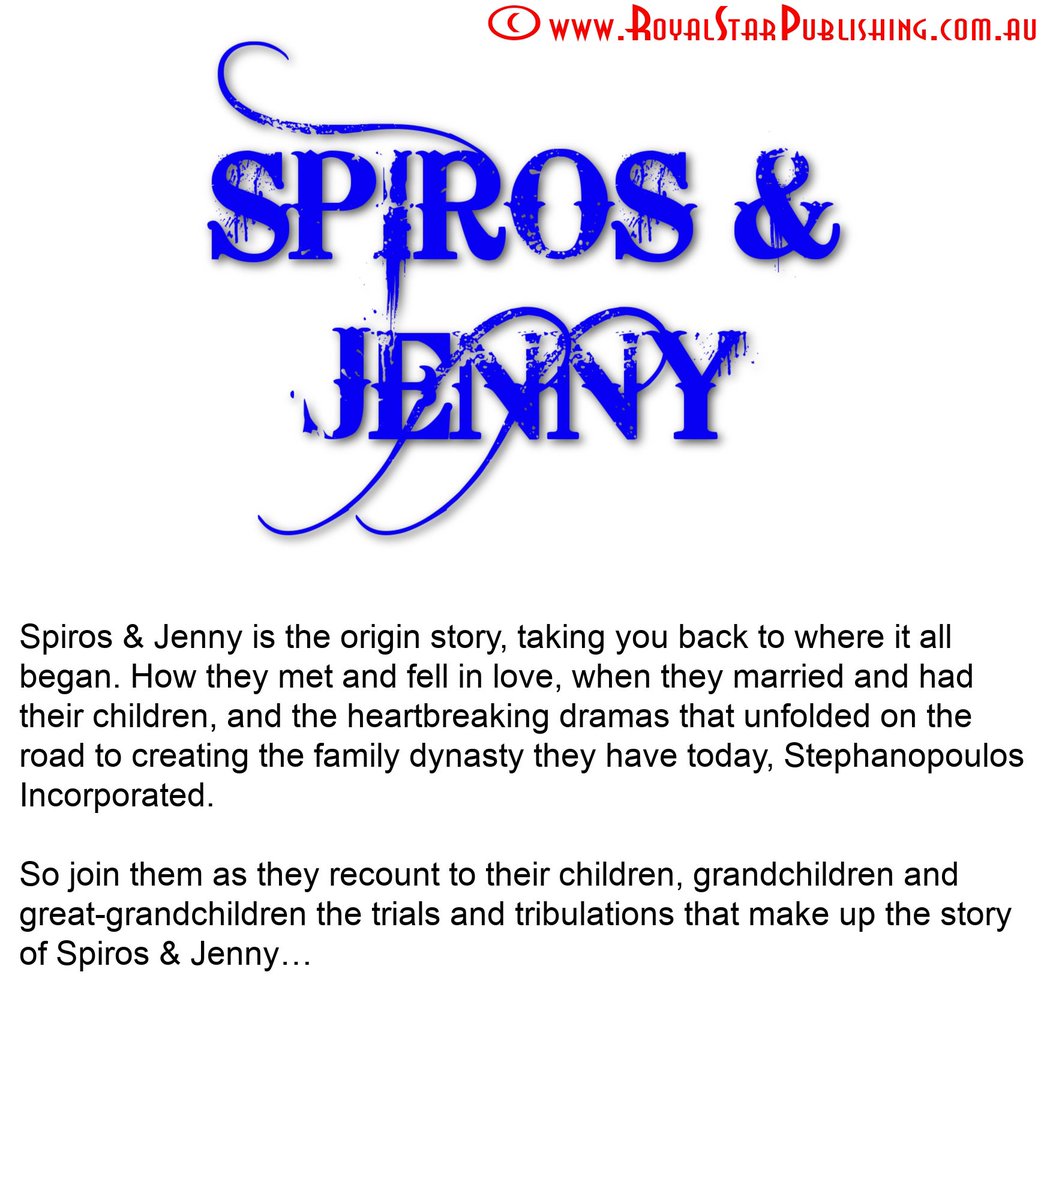 Spiros & Jenny, from the Porn Star Brothers series, by L.J. Diva is in all good online bookstores.
.
#ljdiva #spirosandjenny #thepornstarbrothersseries #author #booktok #book #spicybookseries #romancebooks #familysaga #bookstagram #authorsofinstagram #royalstarpublishing